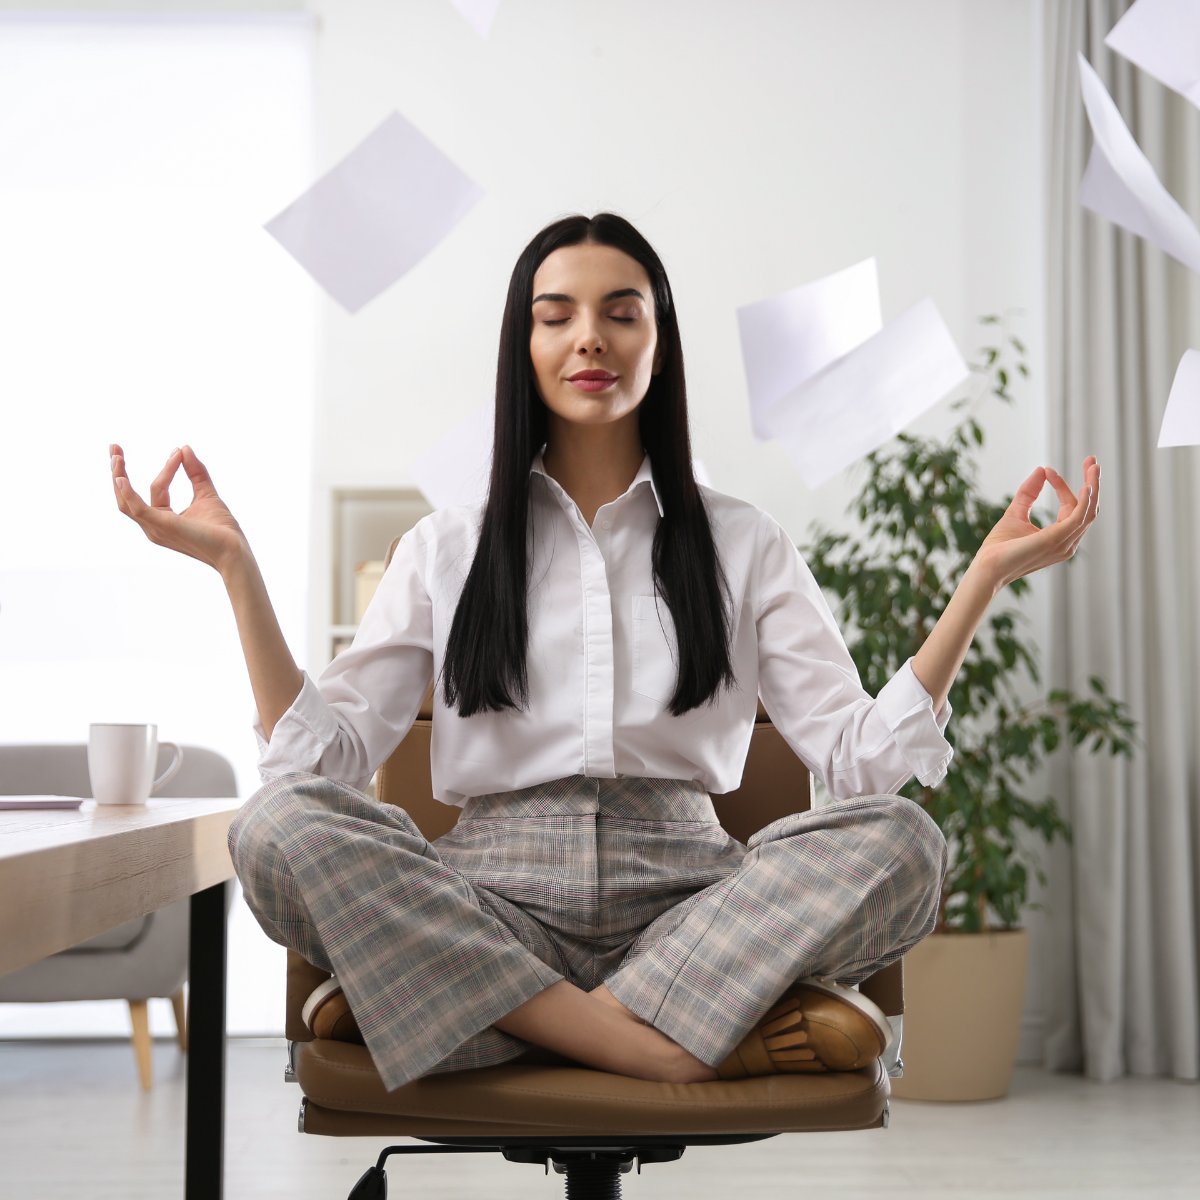 Girl seated in an office in a meditation pose with papers flying about her